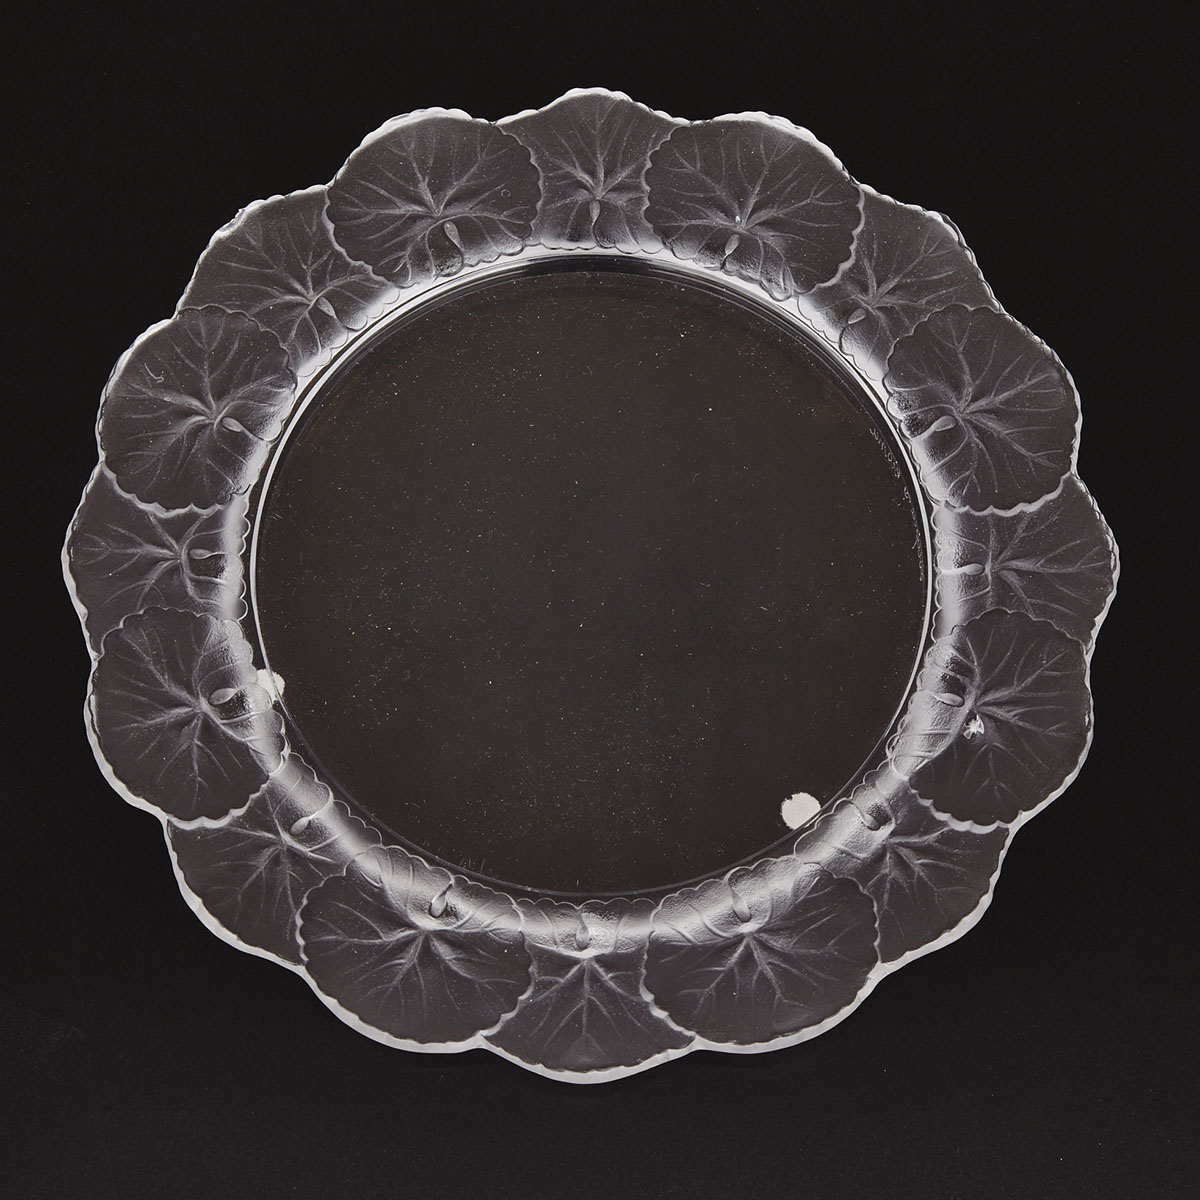 ‘Honfleur’, Lalique Moulded and Frosted Glass Plate, post-1978